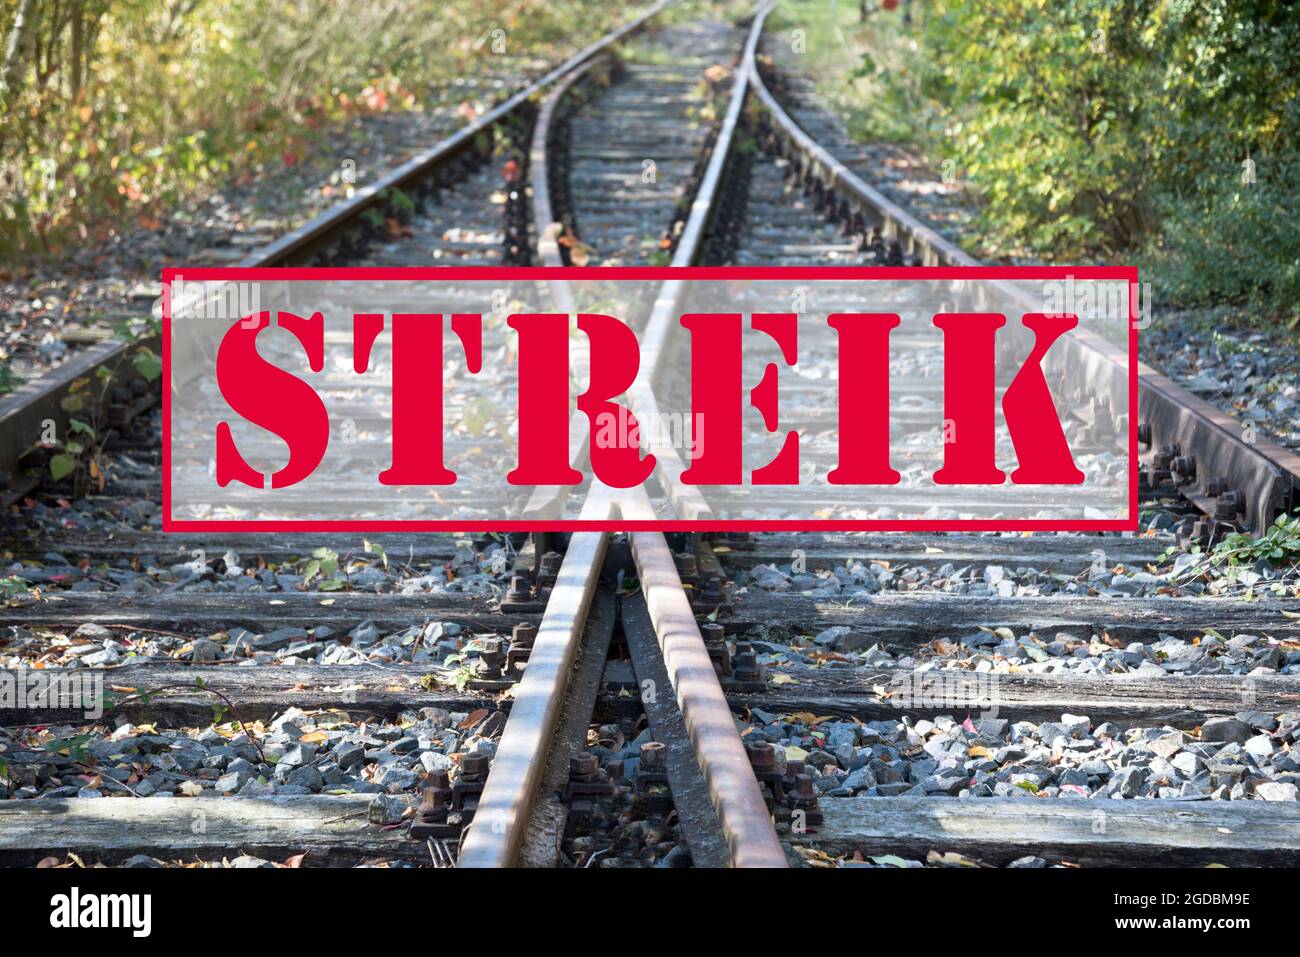 German text banner Streik (meaning strike) over old railway tracks, selected focus Stock Photo